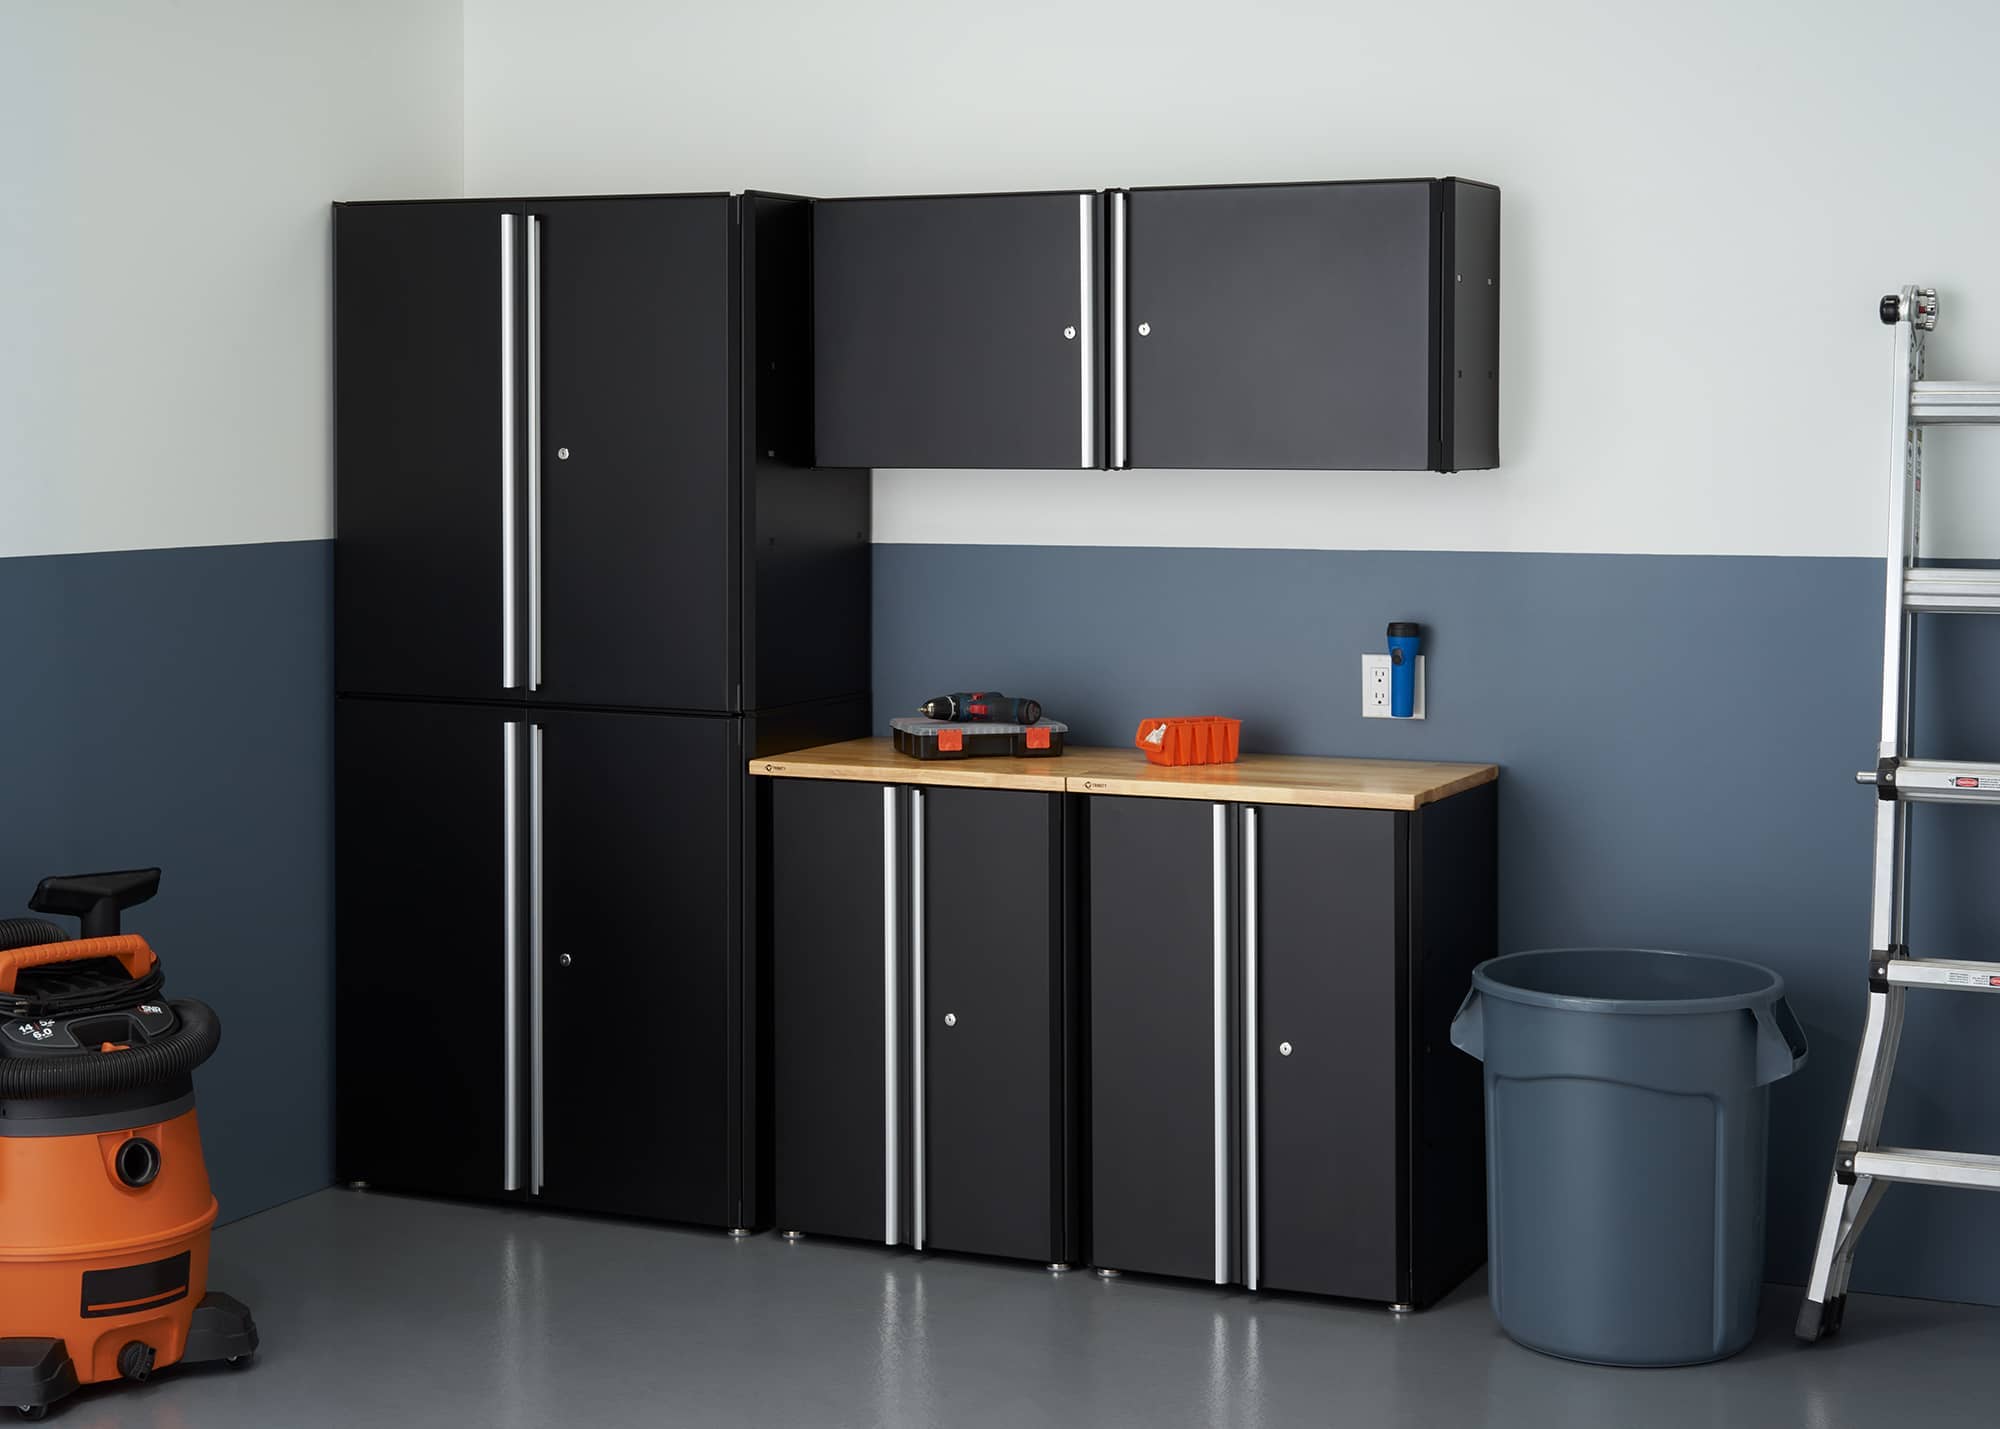 6 piece garage cabinet: 2 base cabinets with wood top, 2 wall cabinets, and 2 modular cabinets stacked together